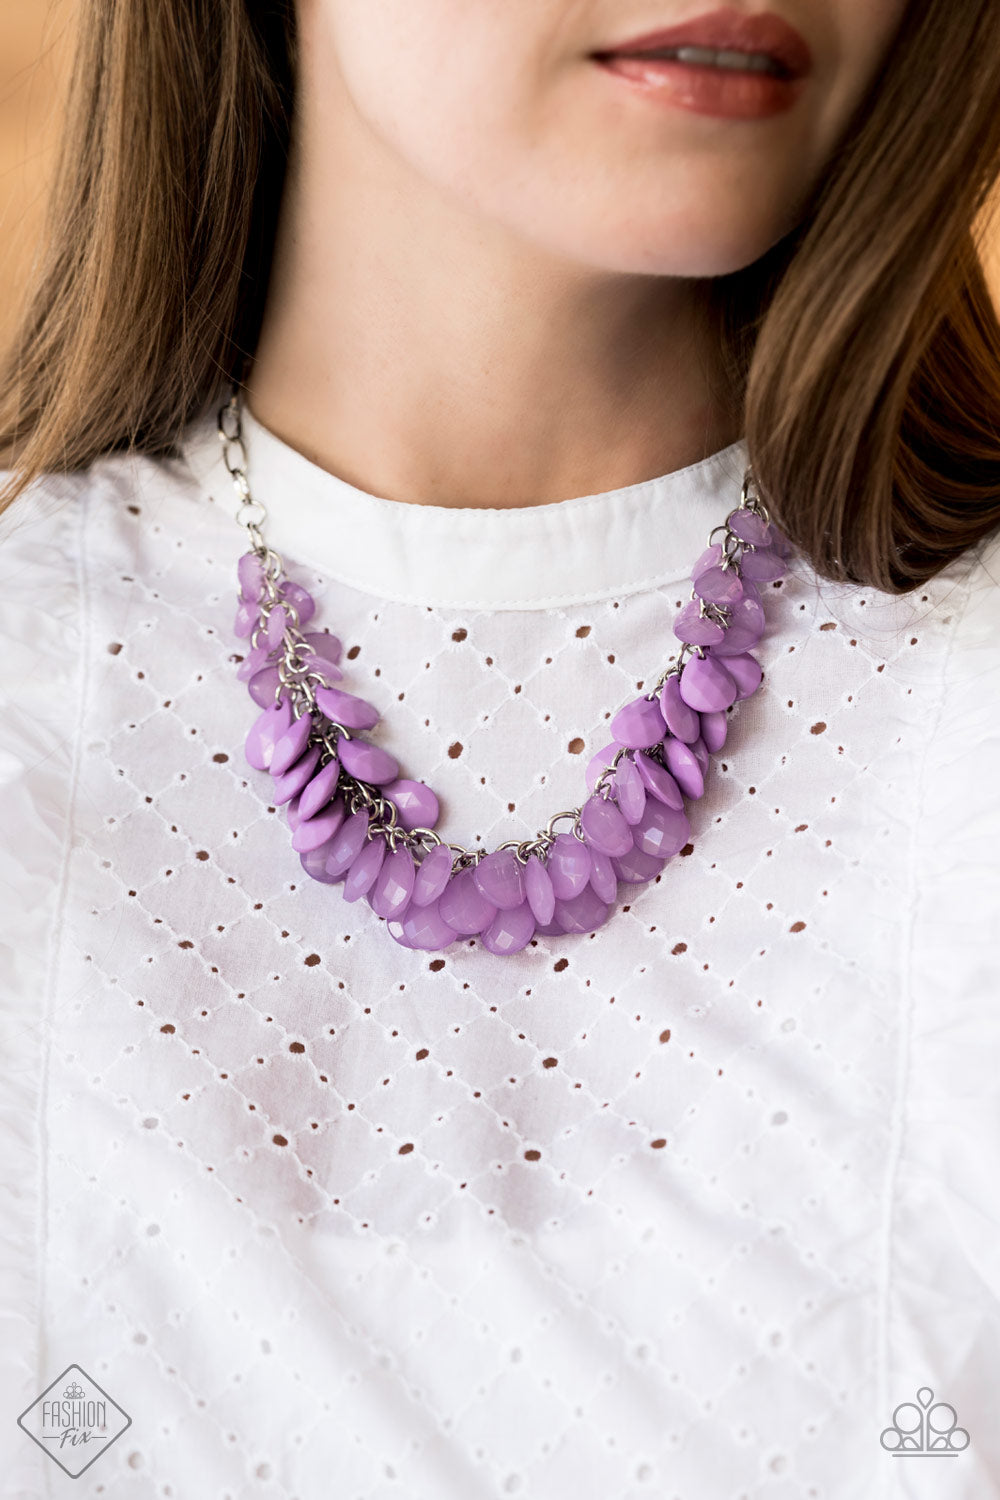 Paparazzi Accessories - Colorfully Clustered - Purple Fashion Fix Necklace July 2020